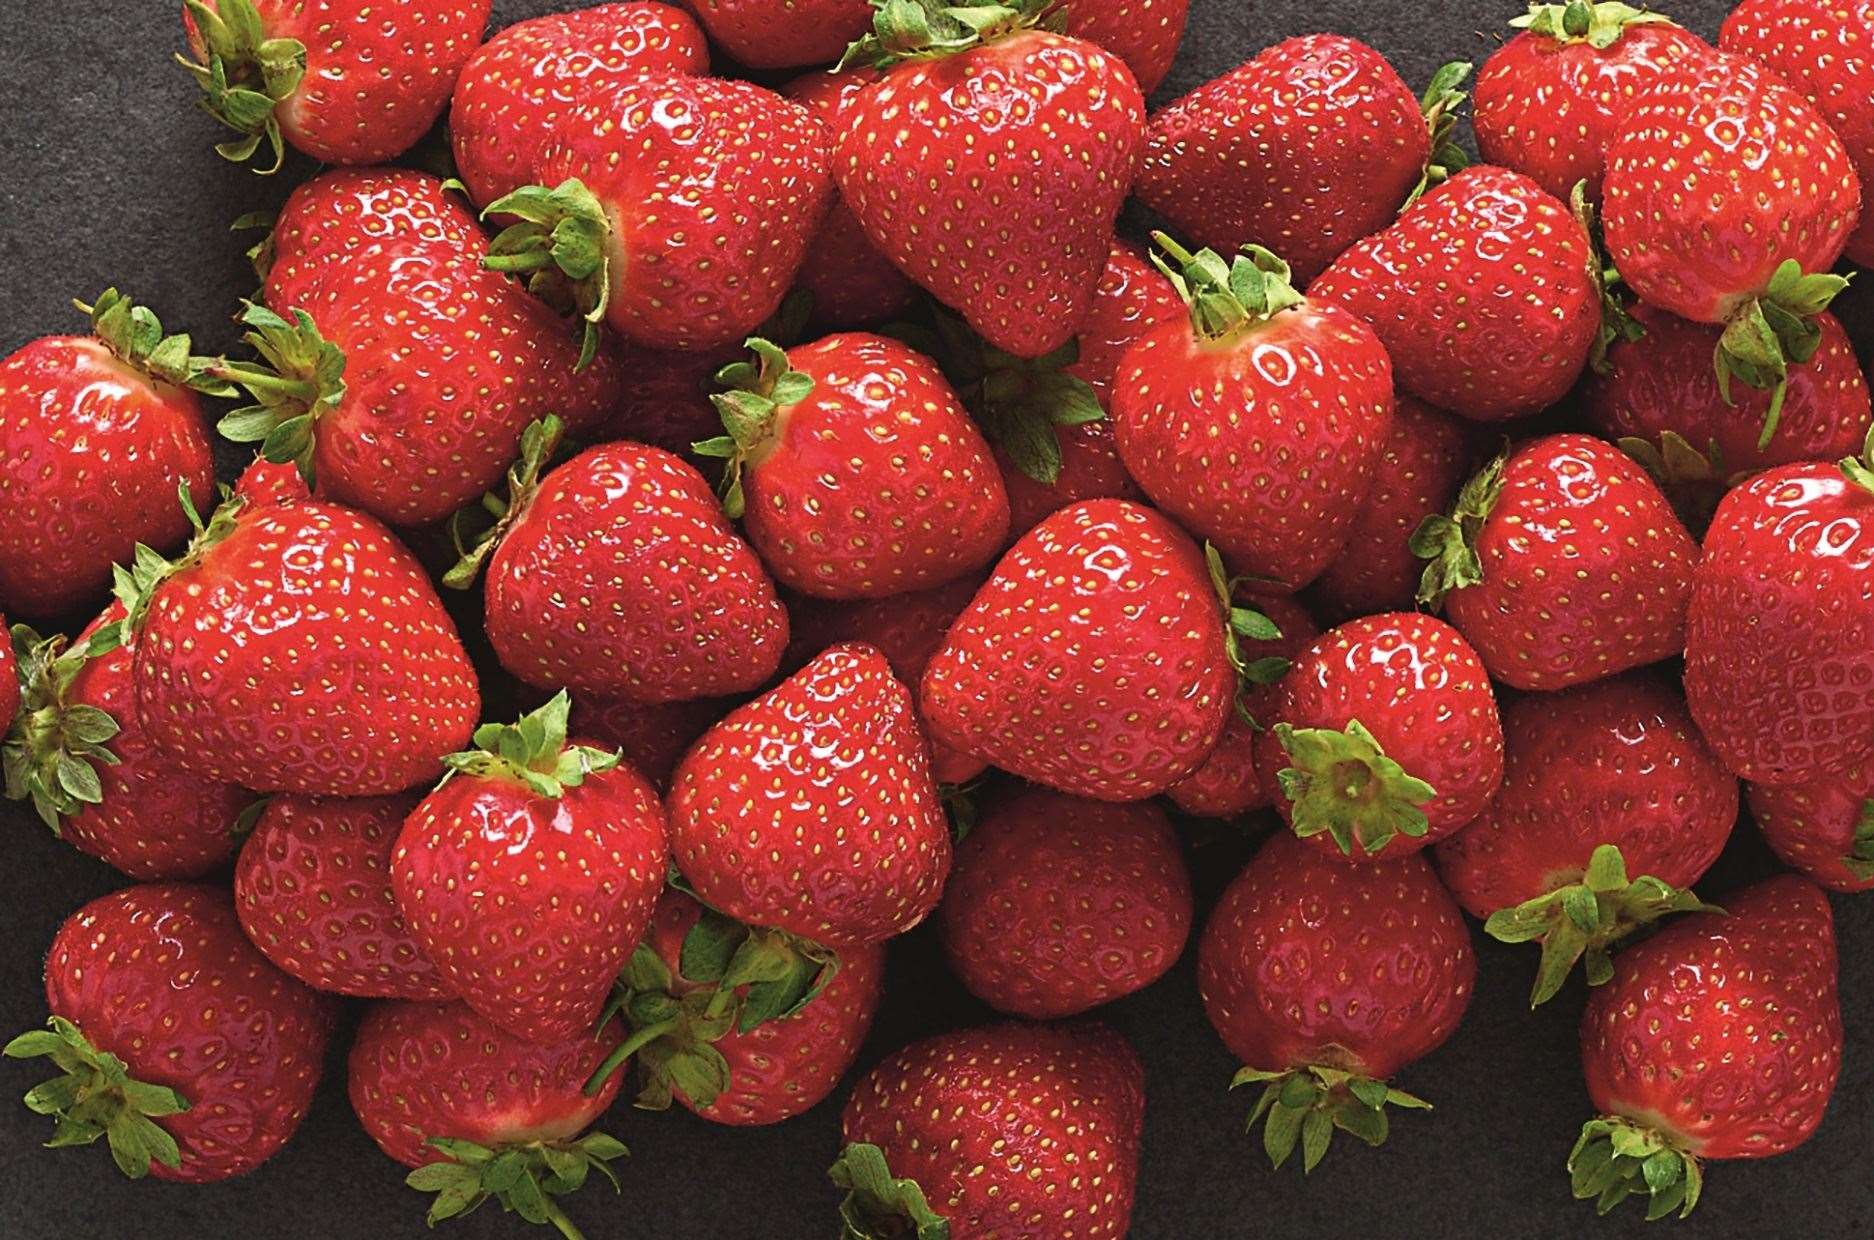 Punnets of the first Scottish strawberries hit Aldi stores from Friday.